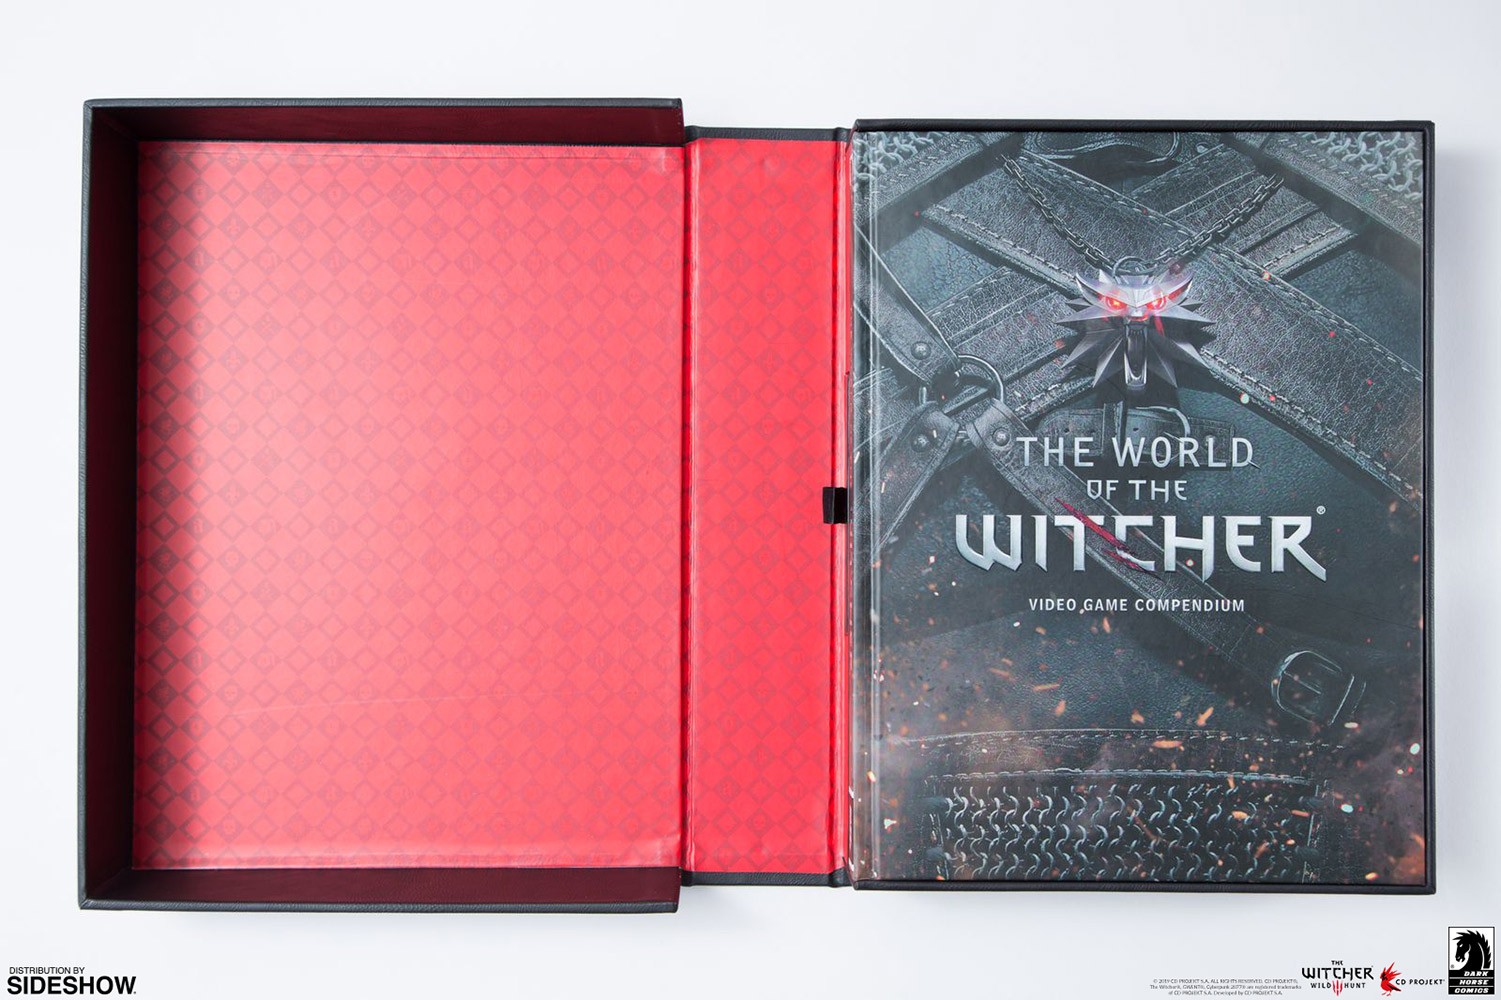 The World of The Witcher- Prototype Shown